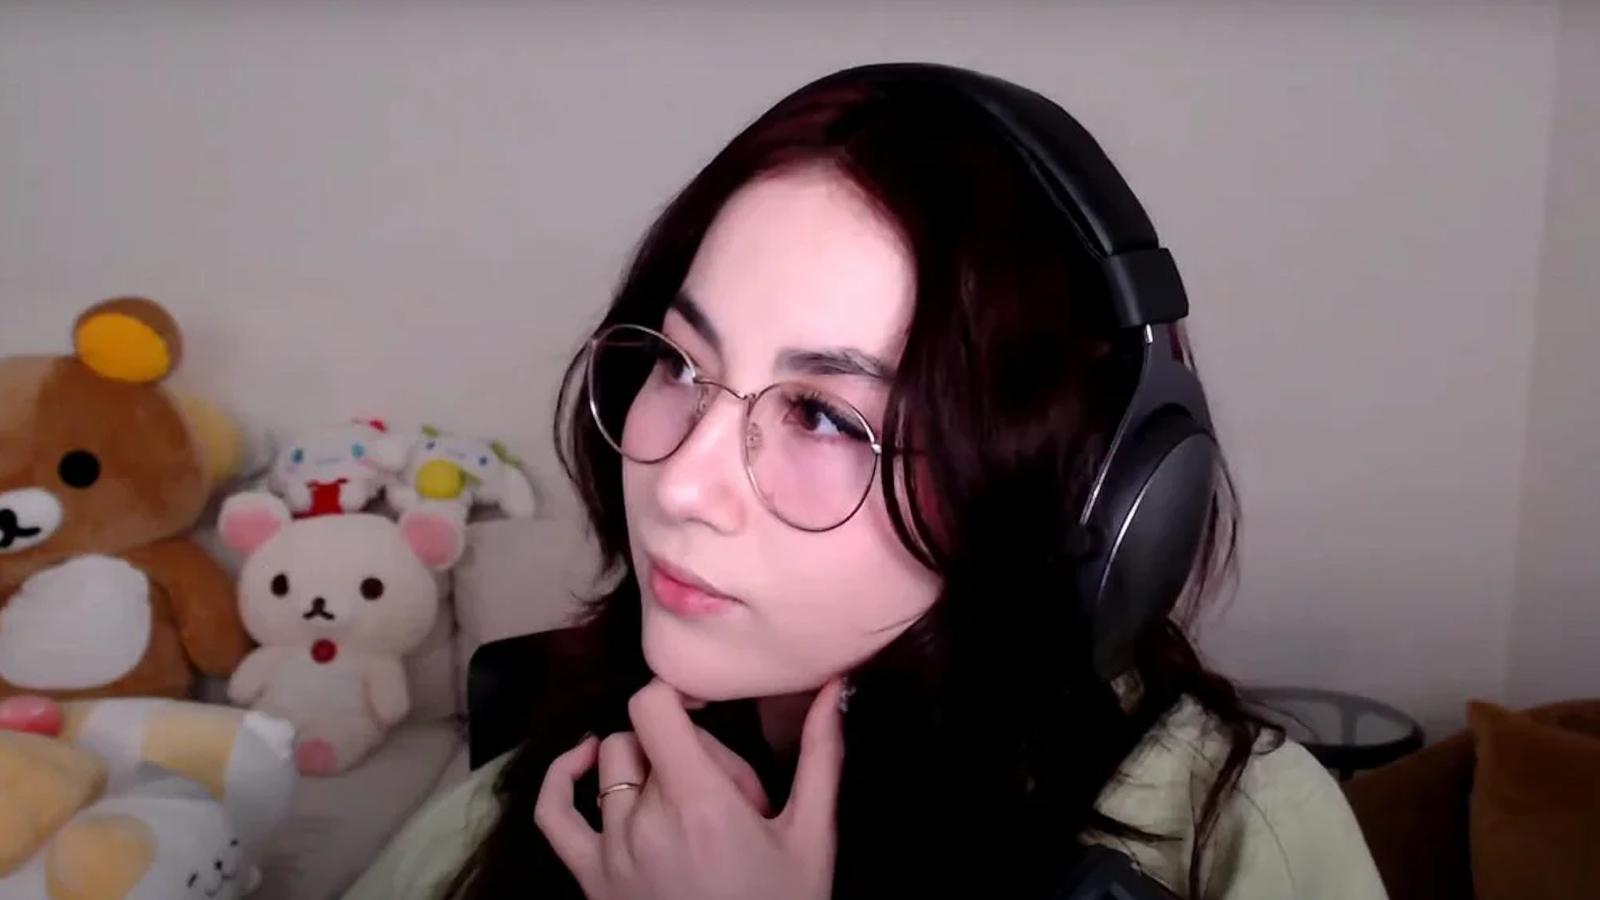 Kyedae on her recent Twitch stream